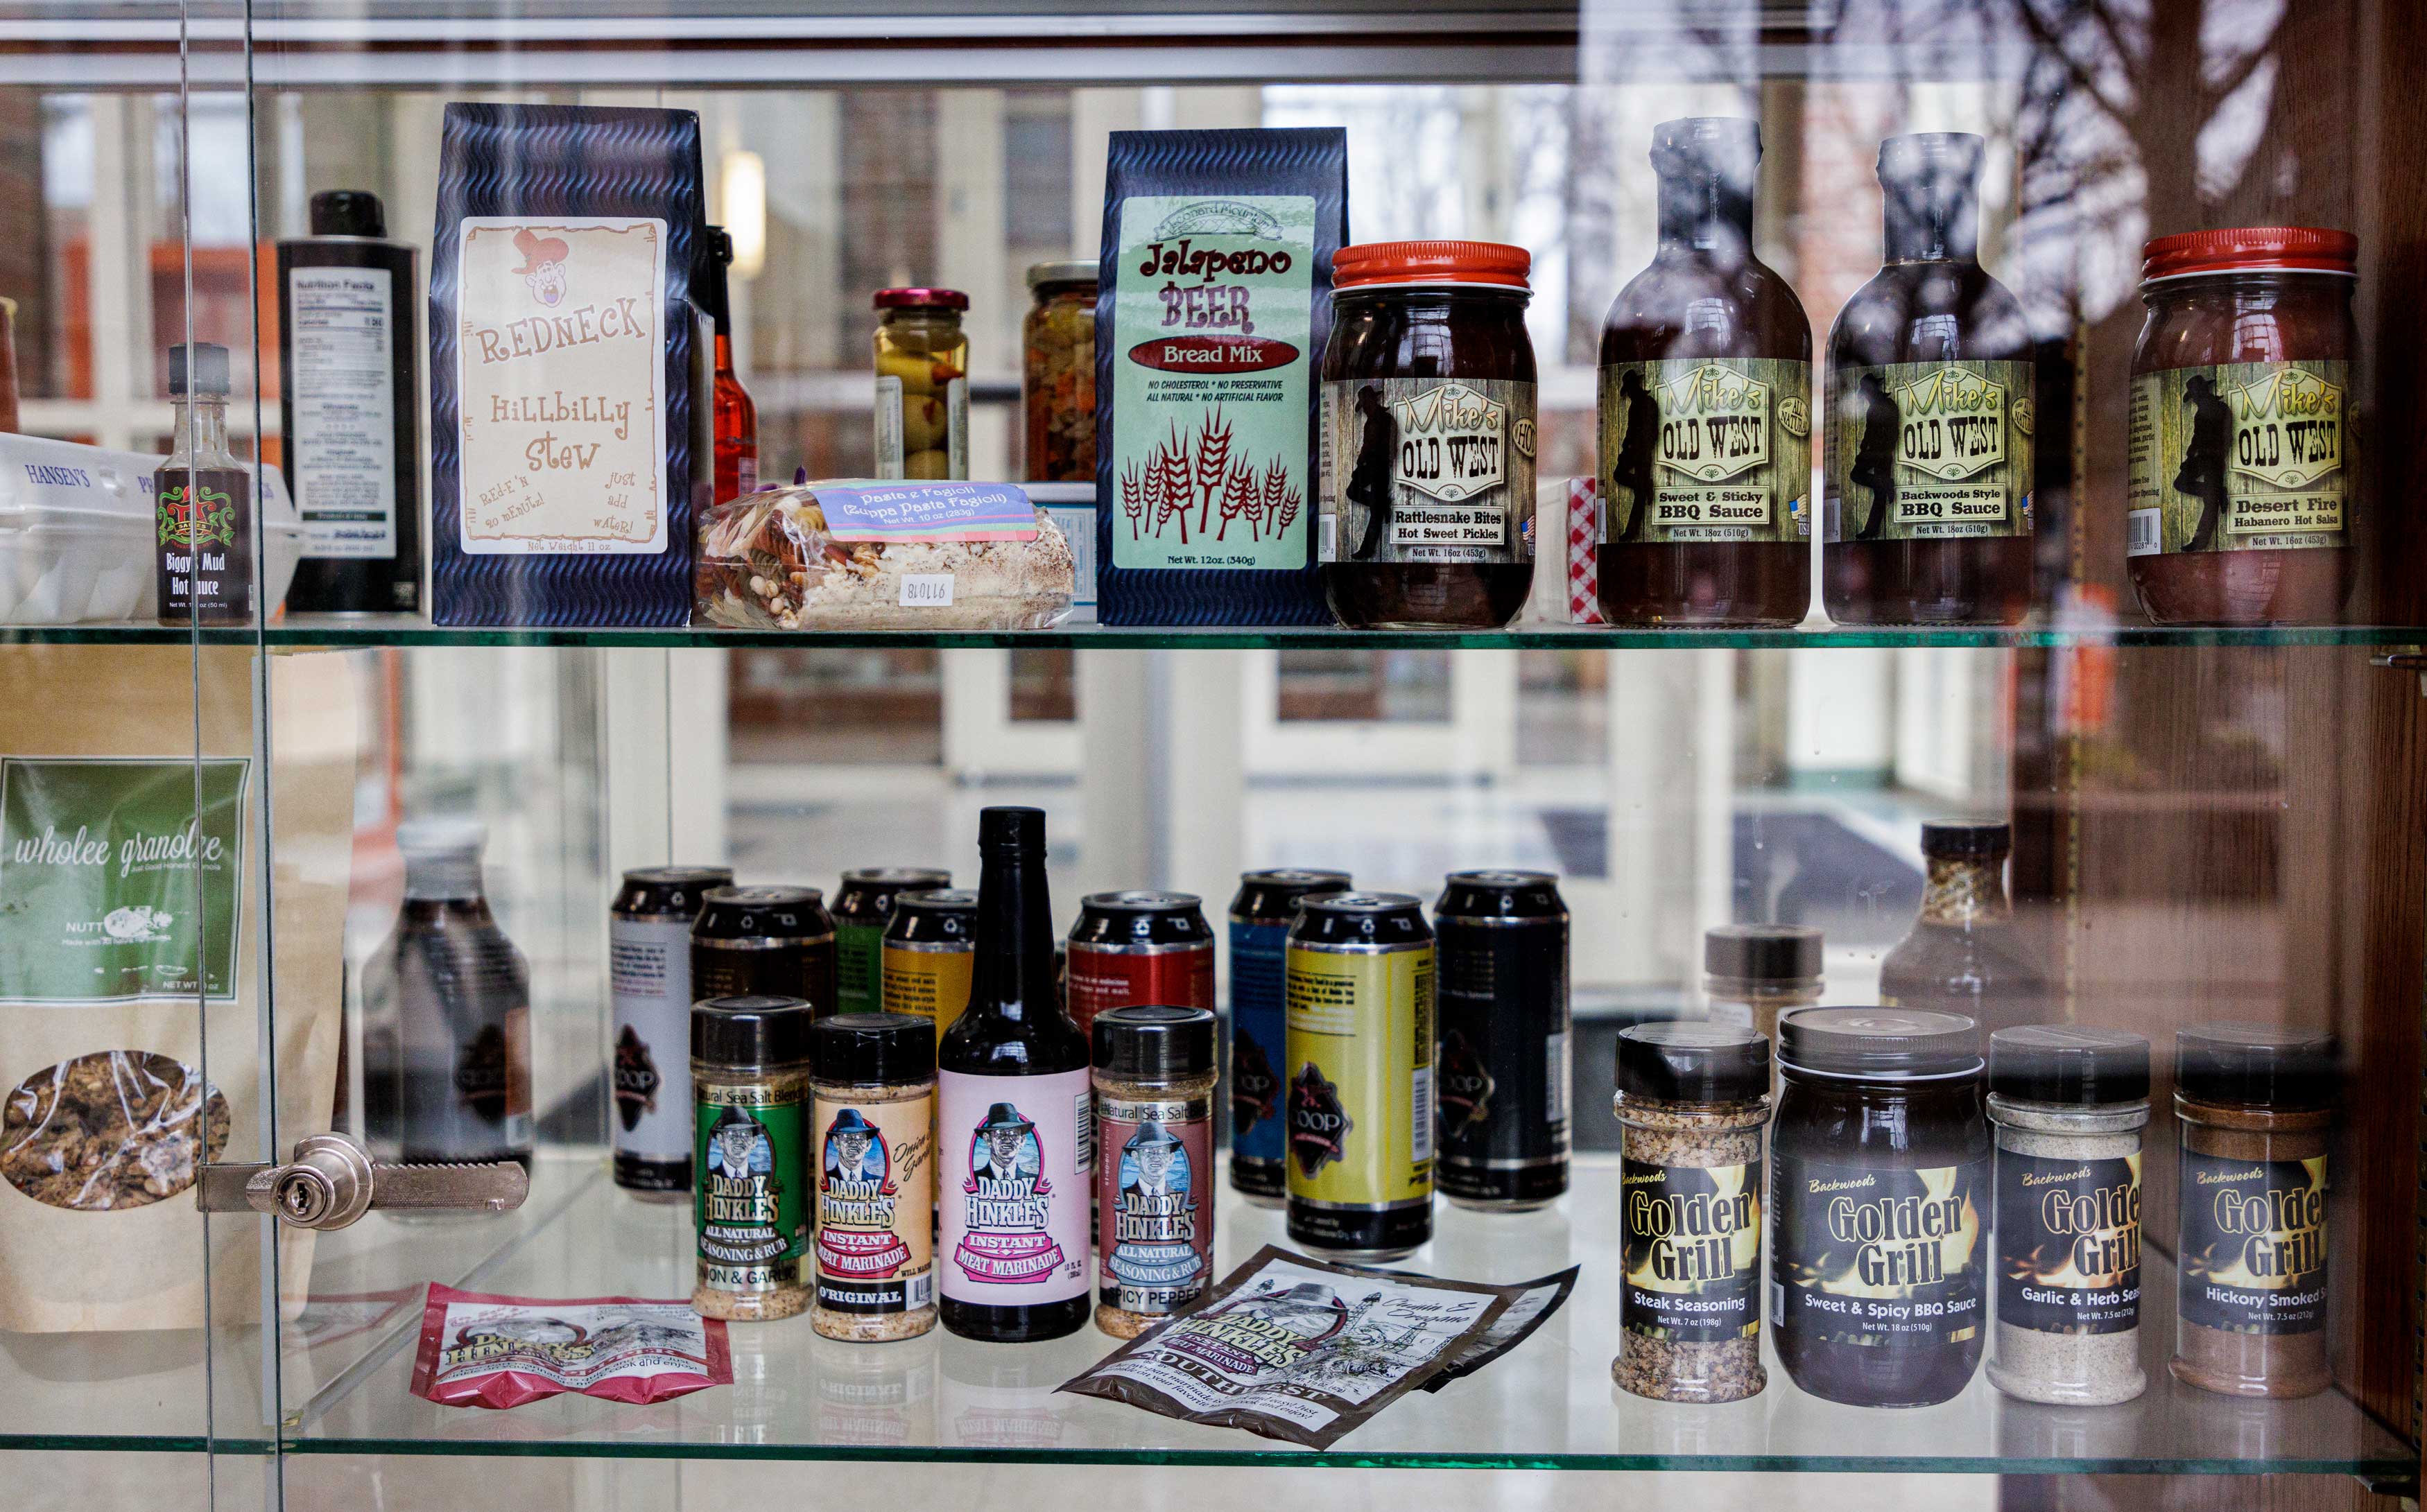 The Food and Agricultural Products Center helps local entrepreneurs develop and sell their own Oklahoma-based products.